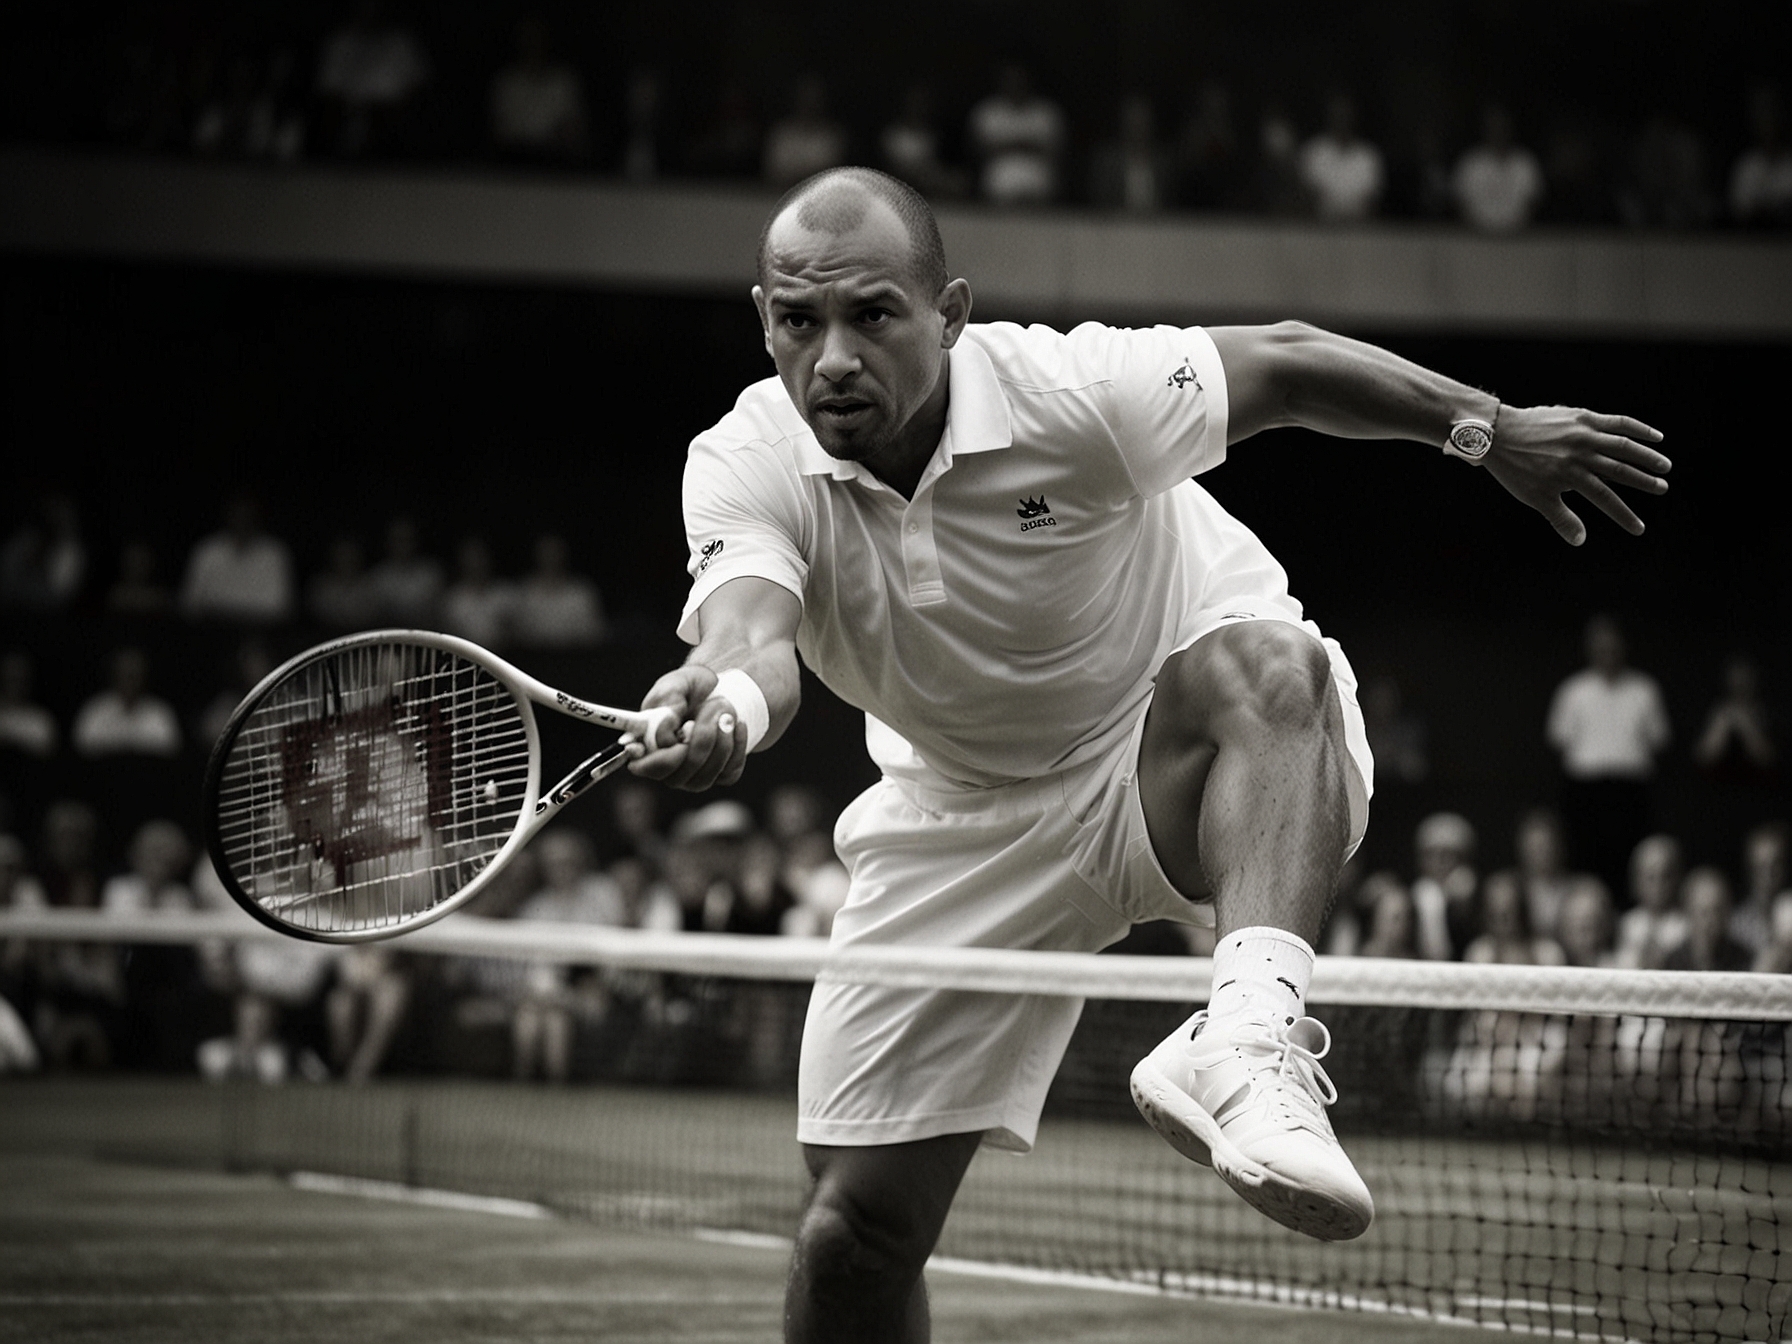 Paul Jubb in action at Wimbledon, demonstrating his competitive spirit. Despite his efforts, he faced a tough opponent and could not advance past the first round.